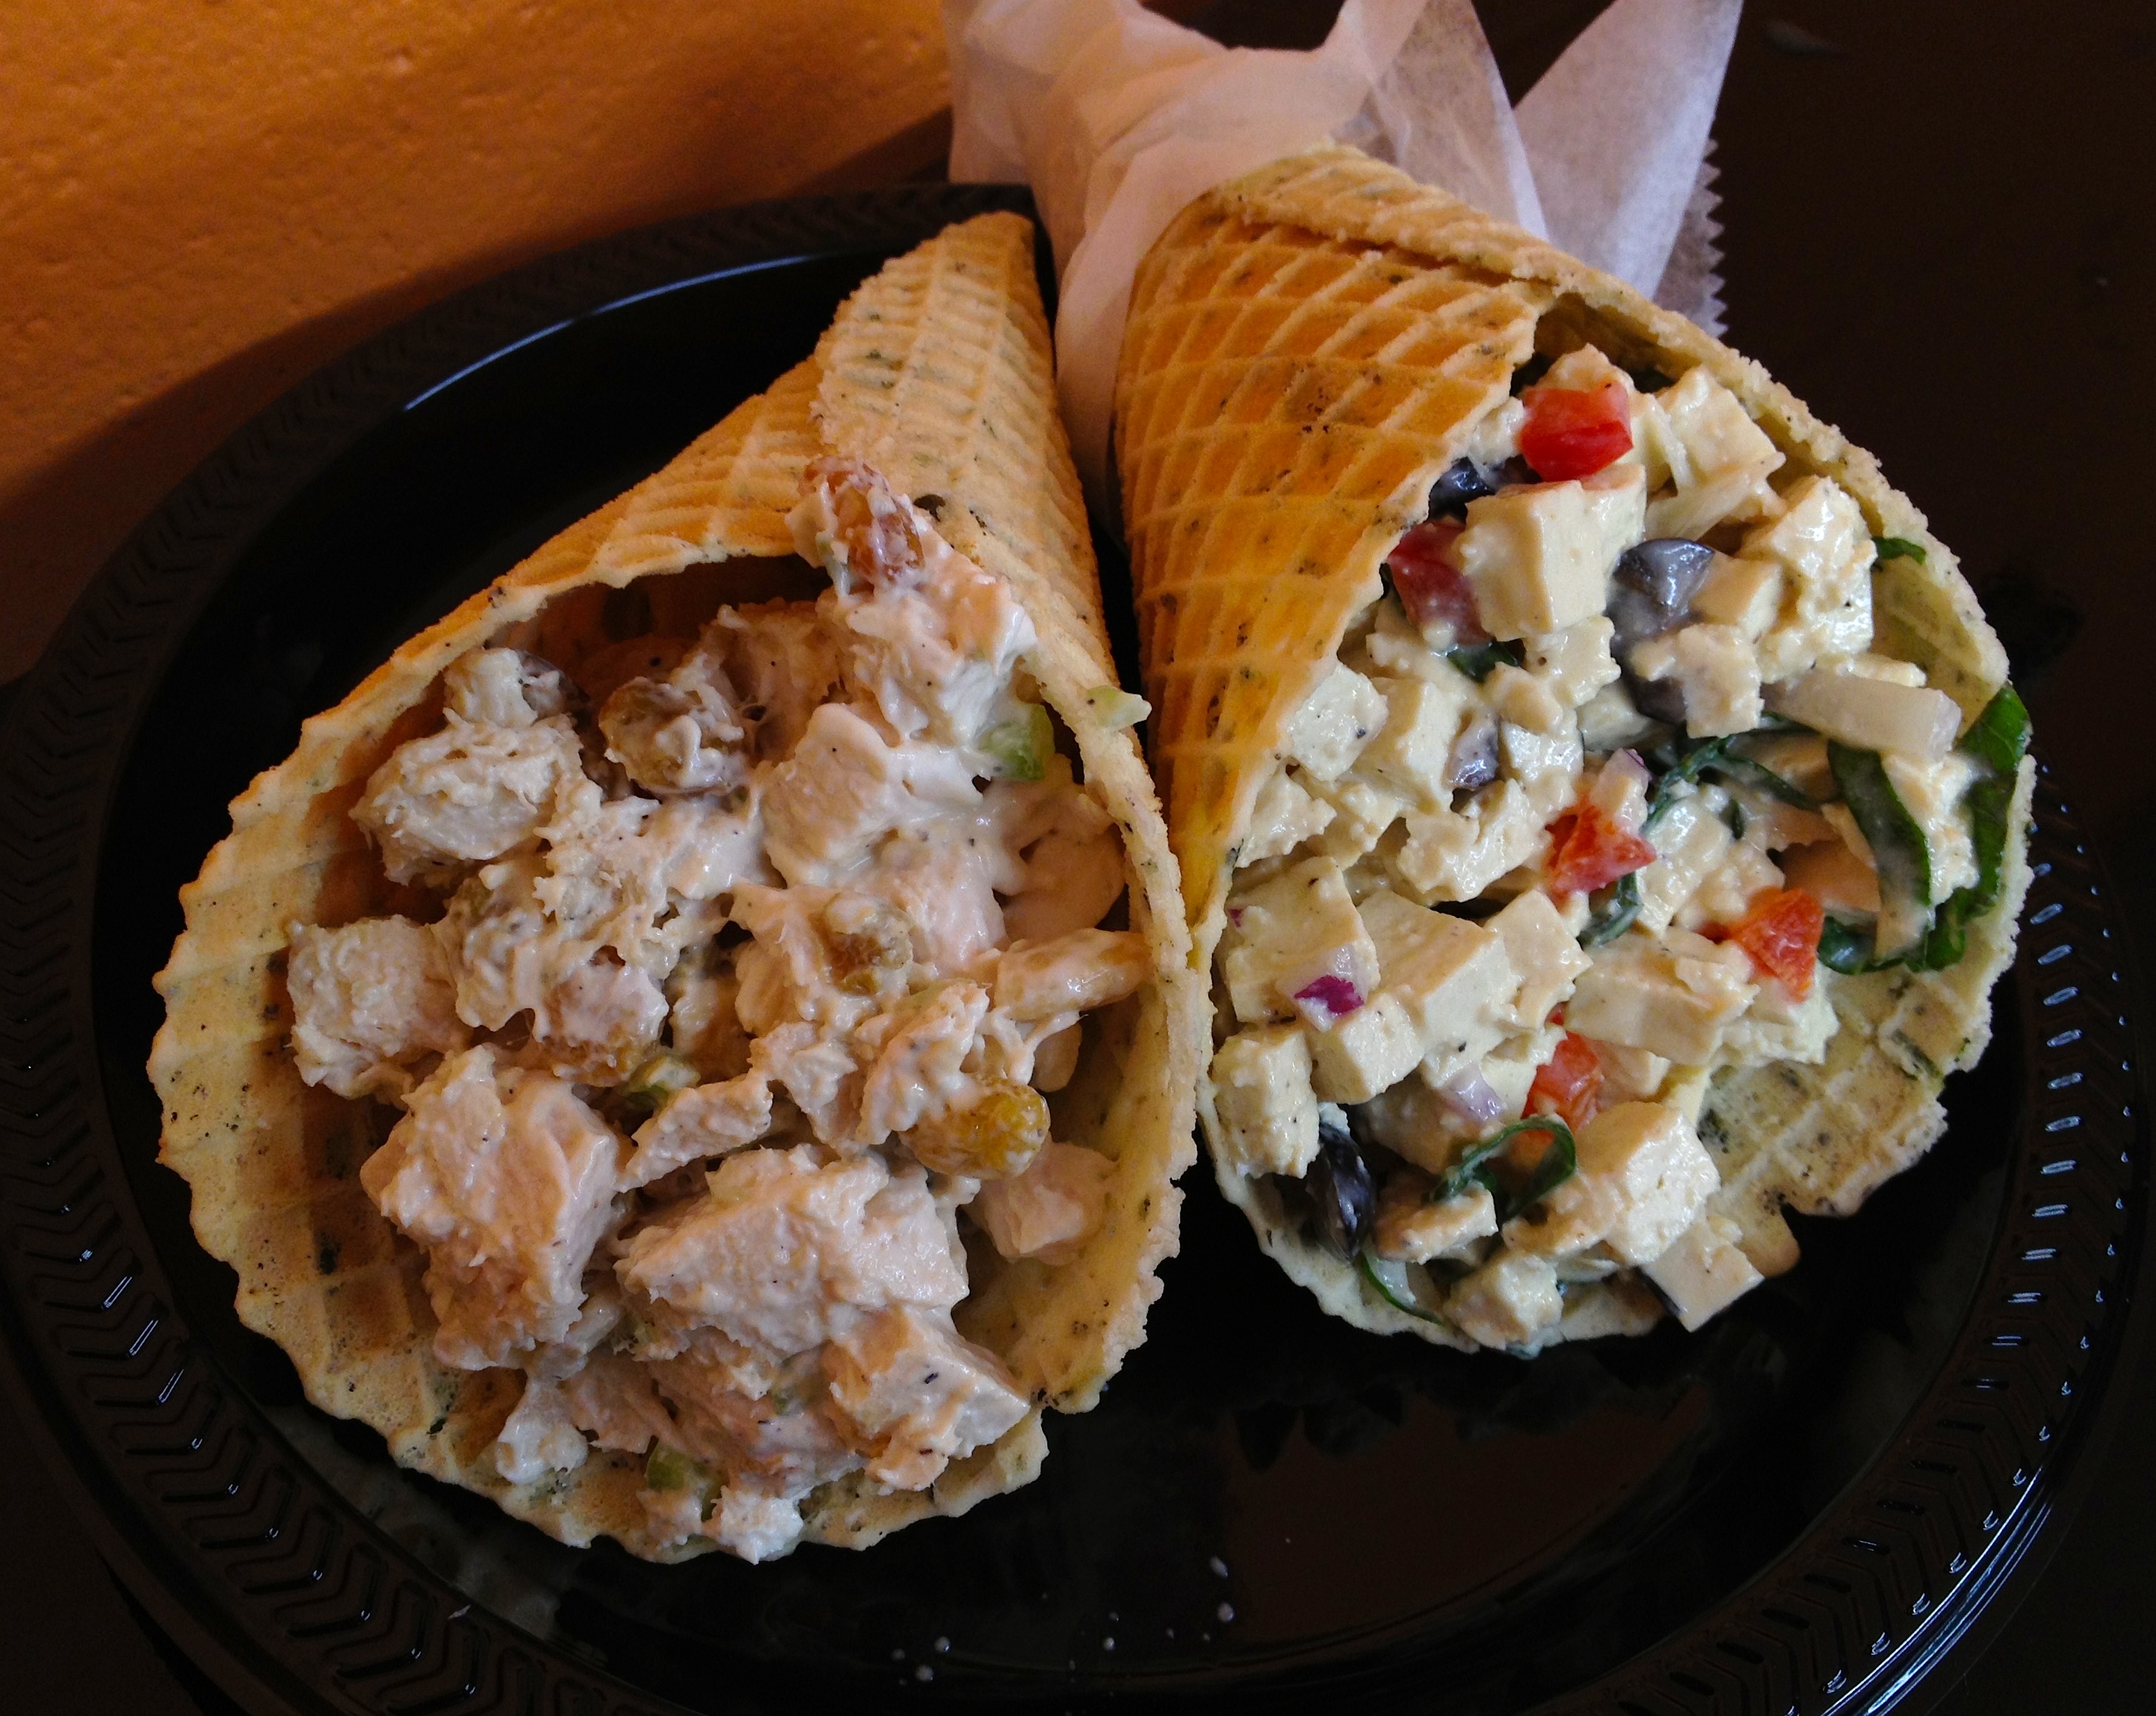 Get your lunch in the cone zone at Neighborhood Café